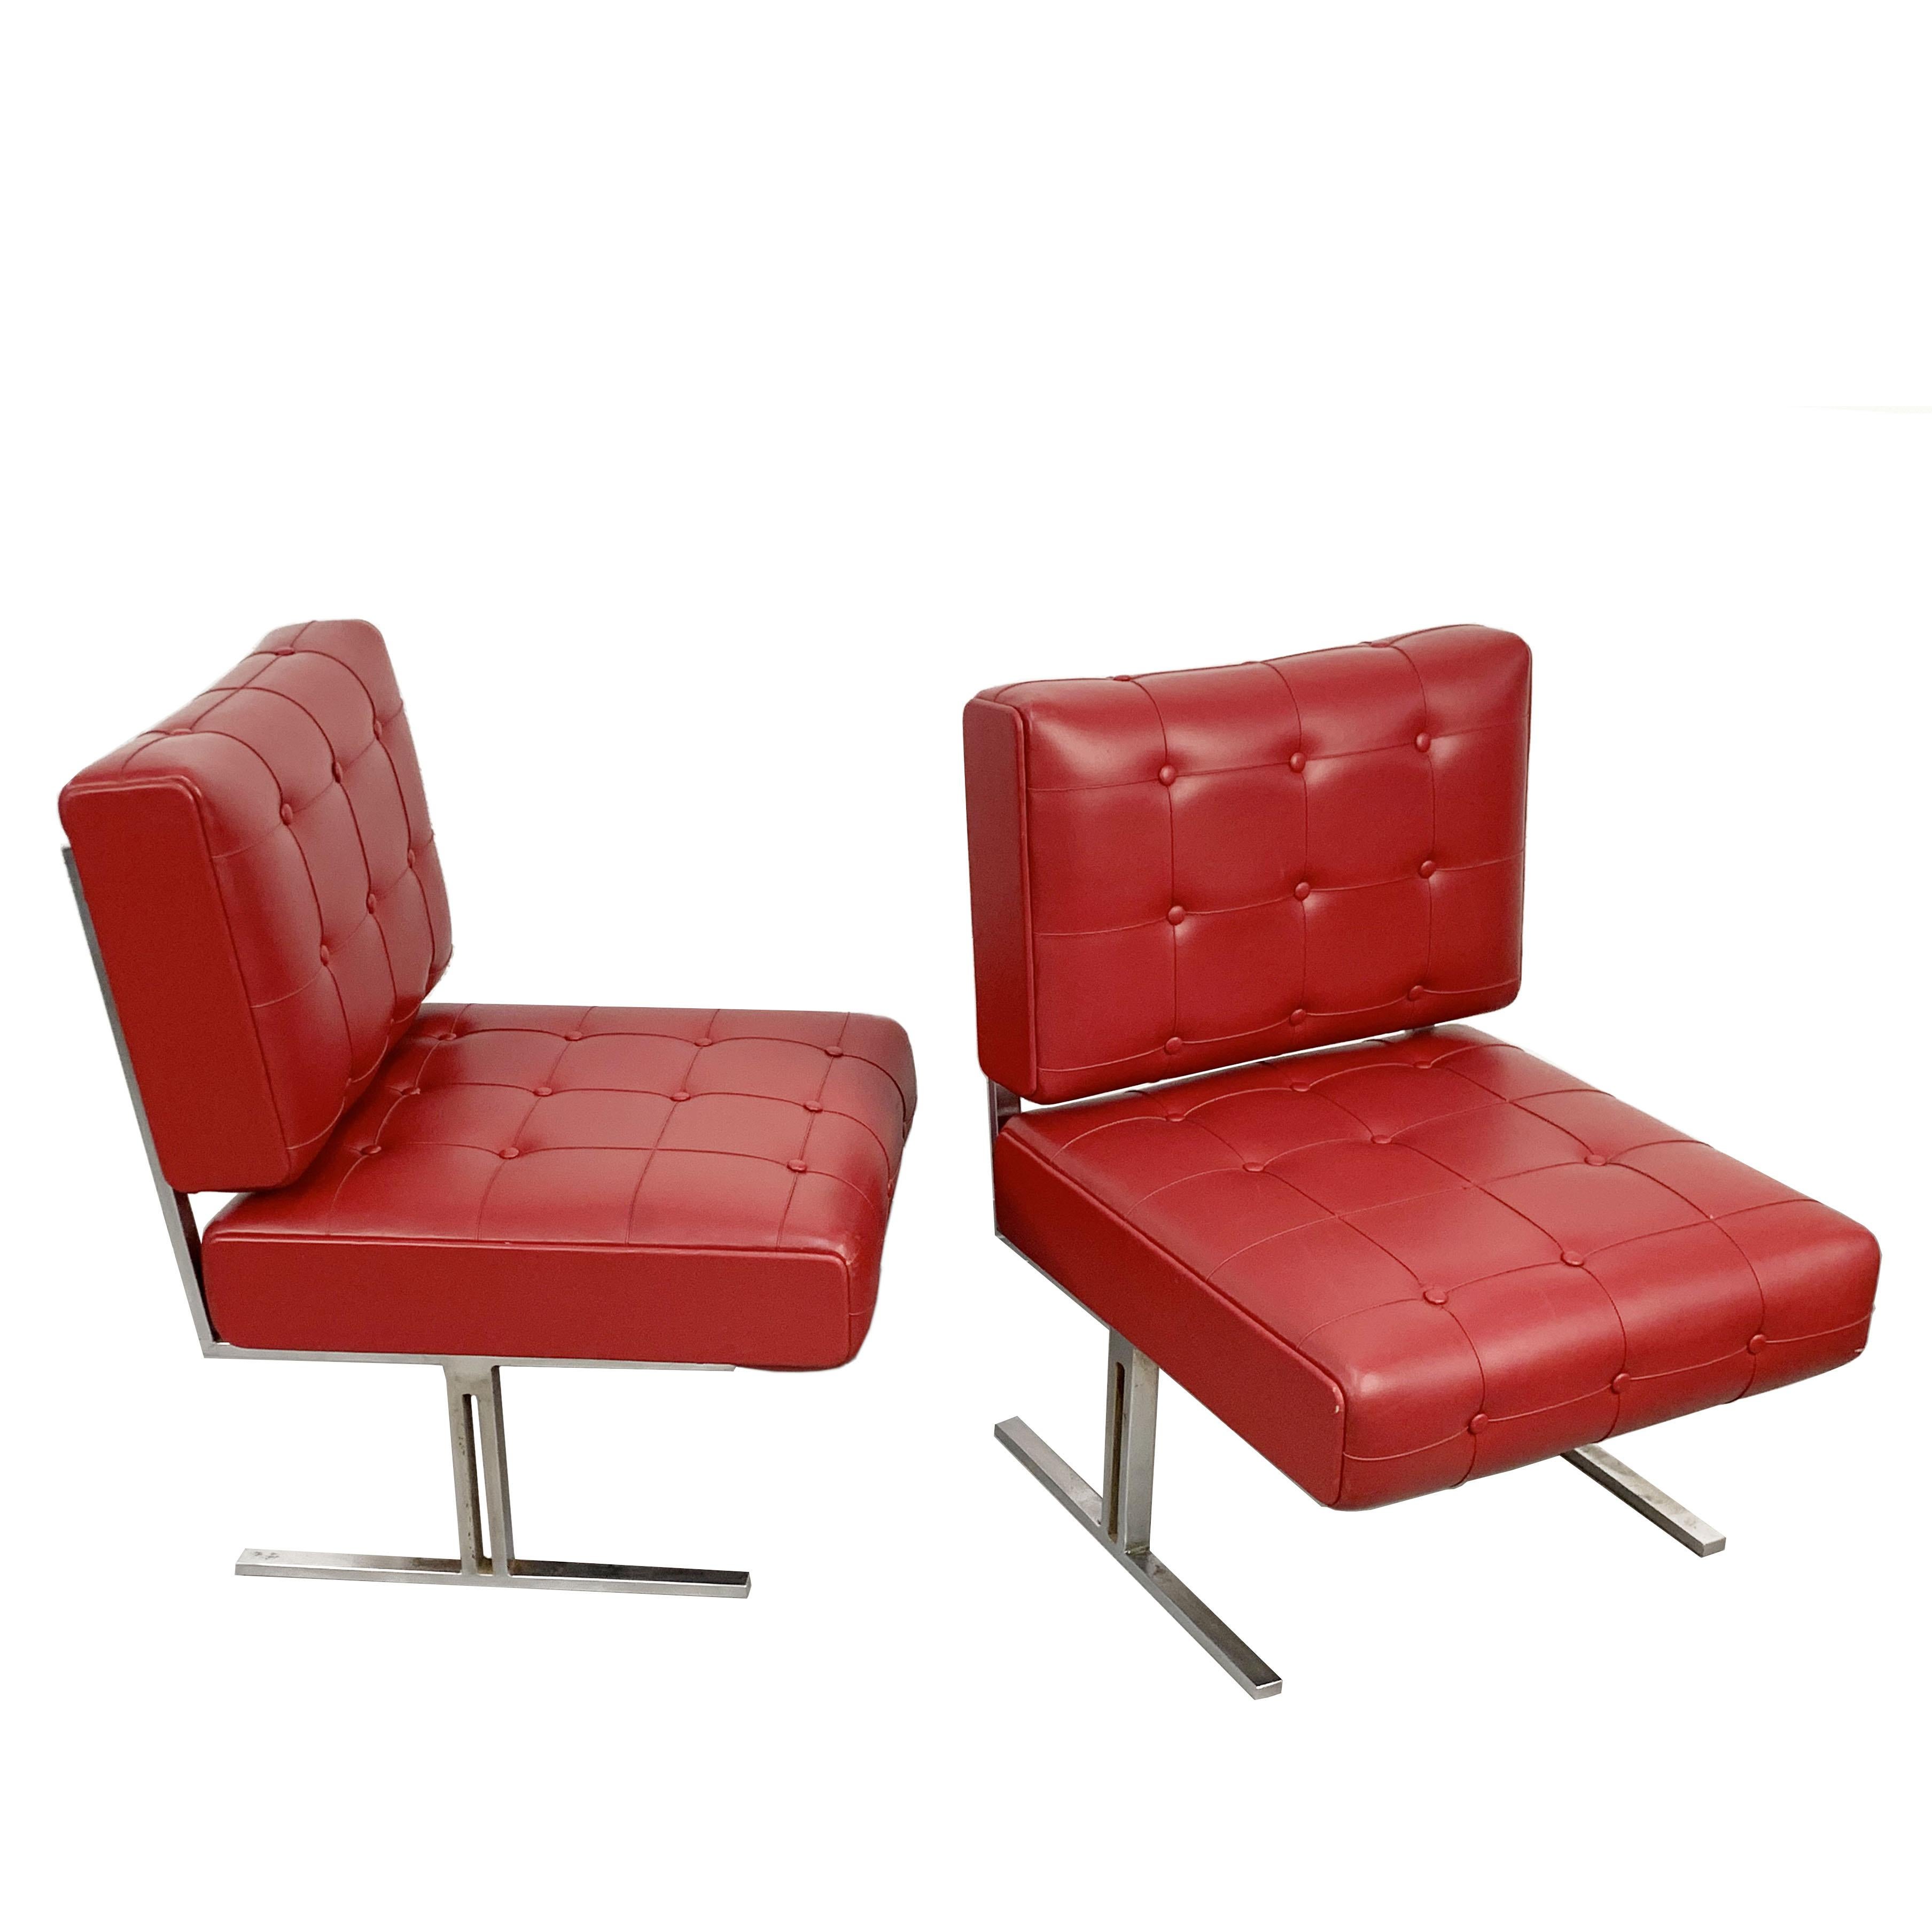 Rare red vintage leatherette lounge chairs in the style of Robert Haussmann for De Sede. Hand-built in the 1950s, these rare armchairs have a chromed steel frame and capitonne cushions. The conditions are appropriate for his age. On request we can